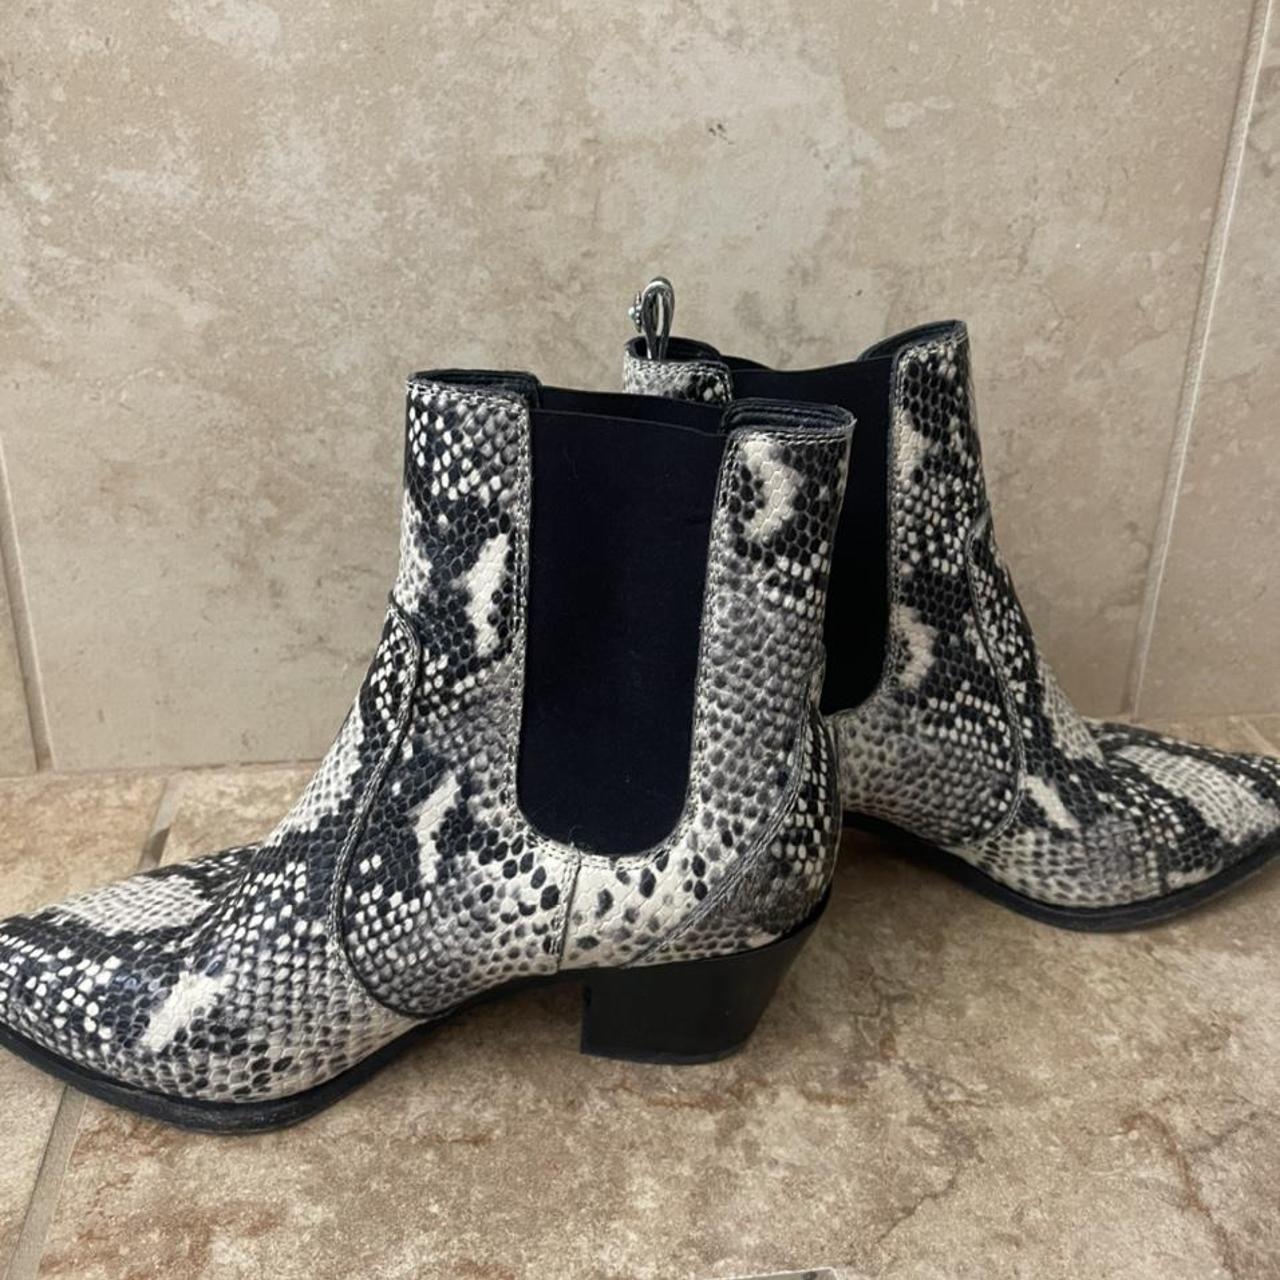 Paige Willa Snake ROCCIA Leather Western Ankle Boot... - Depop